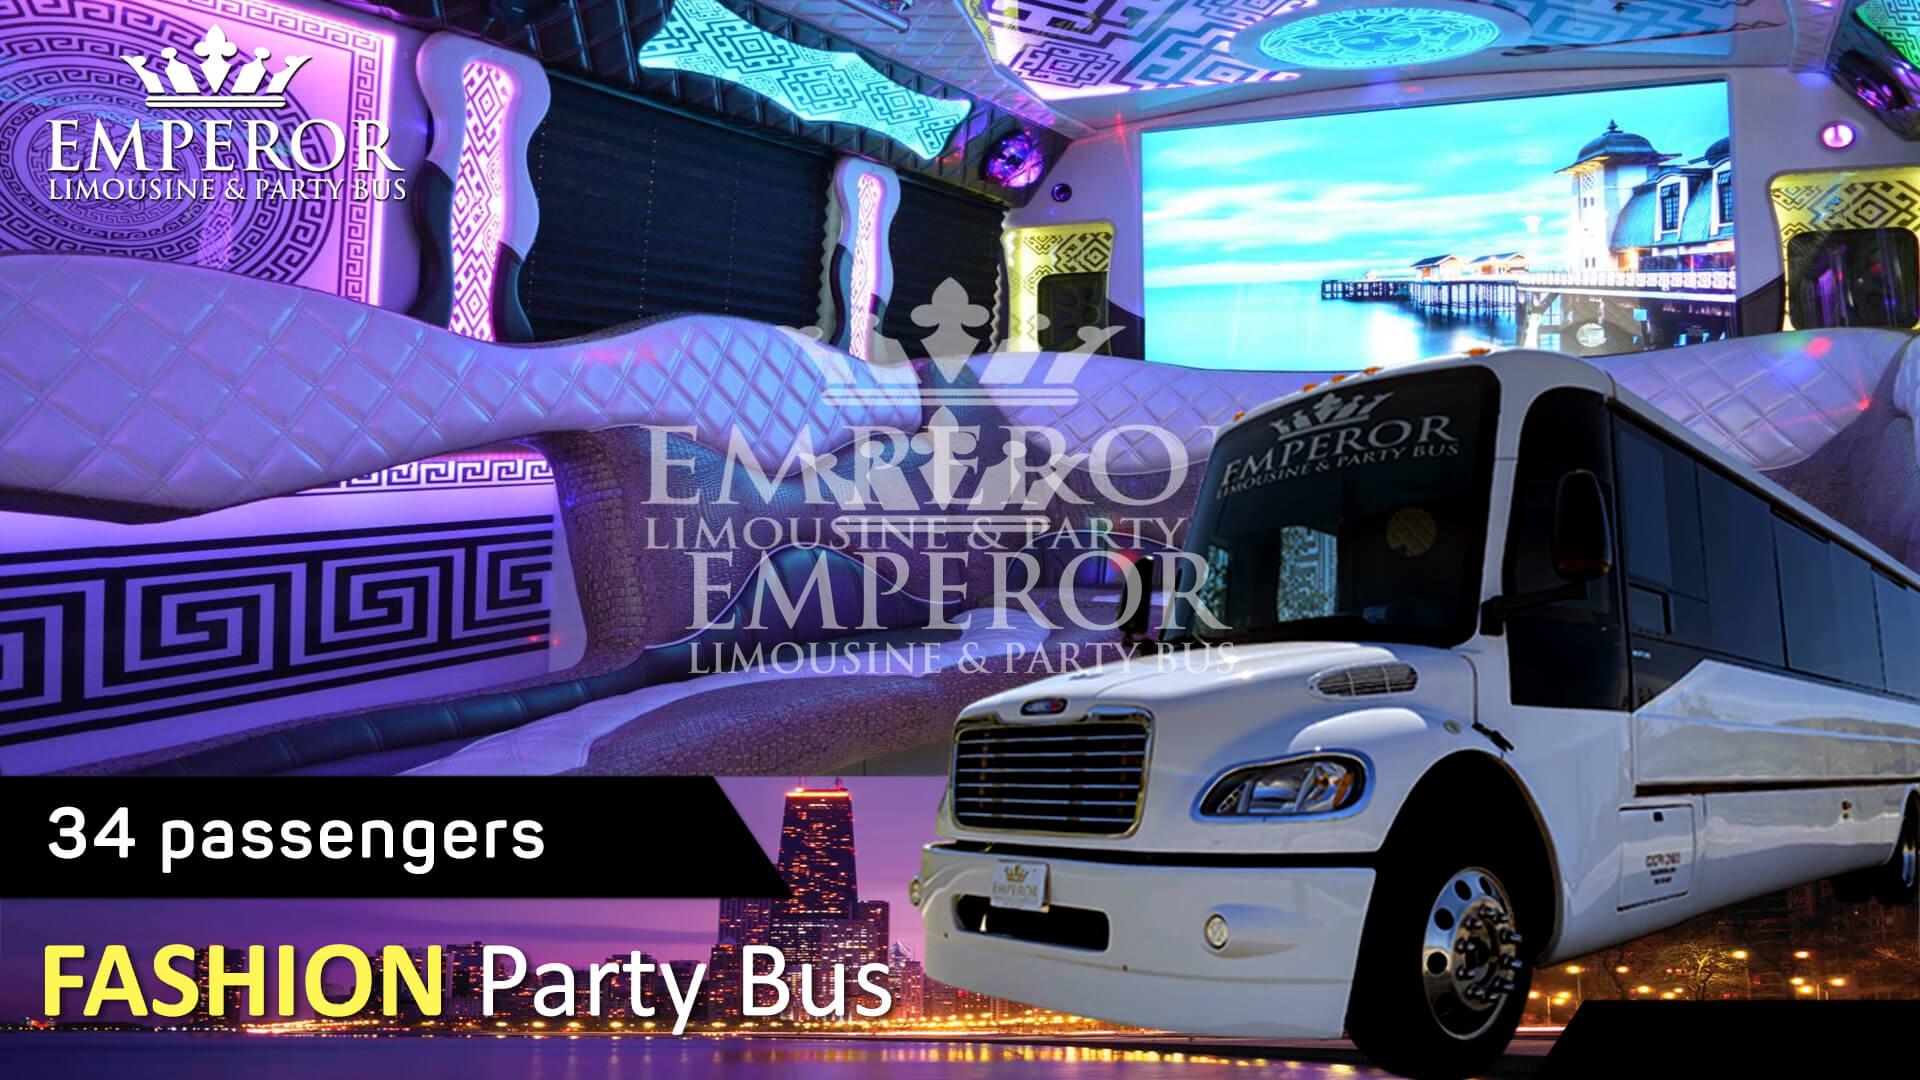 Party bus service in Bradley - Fashion Edition